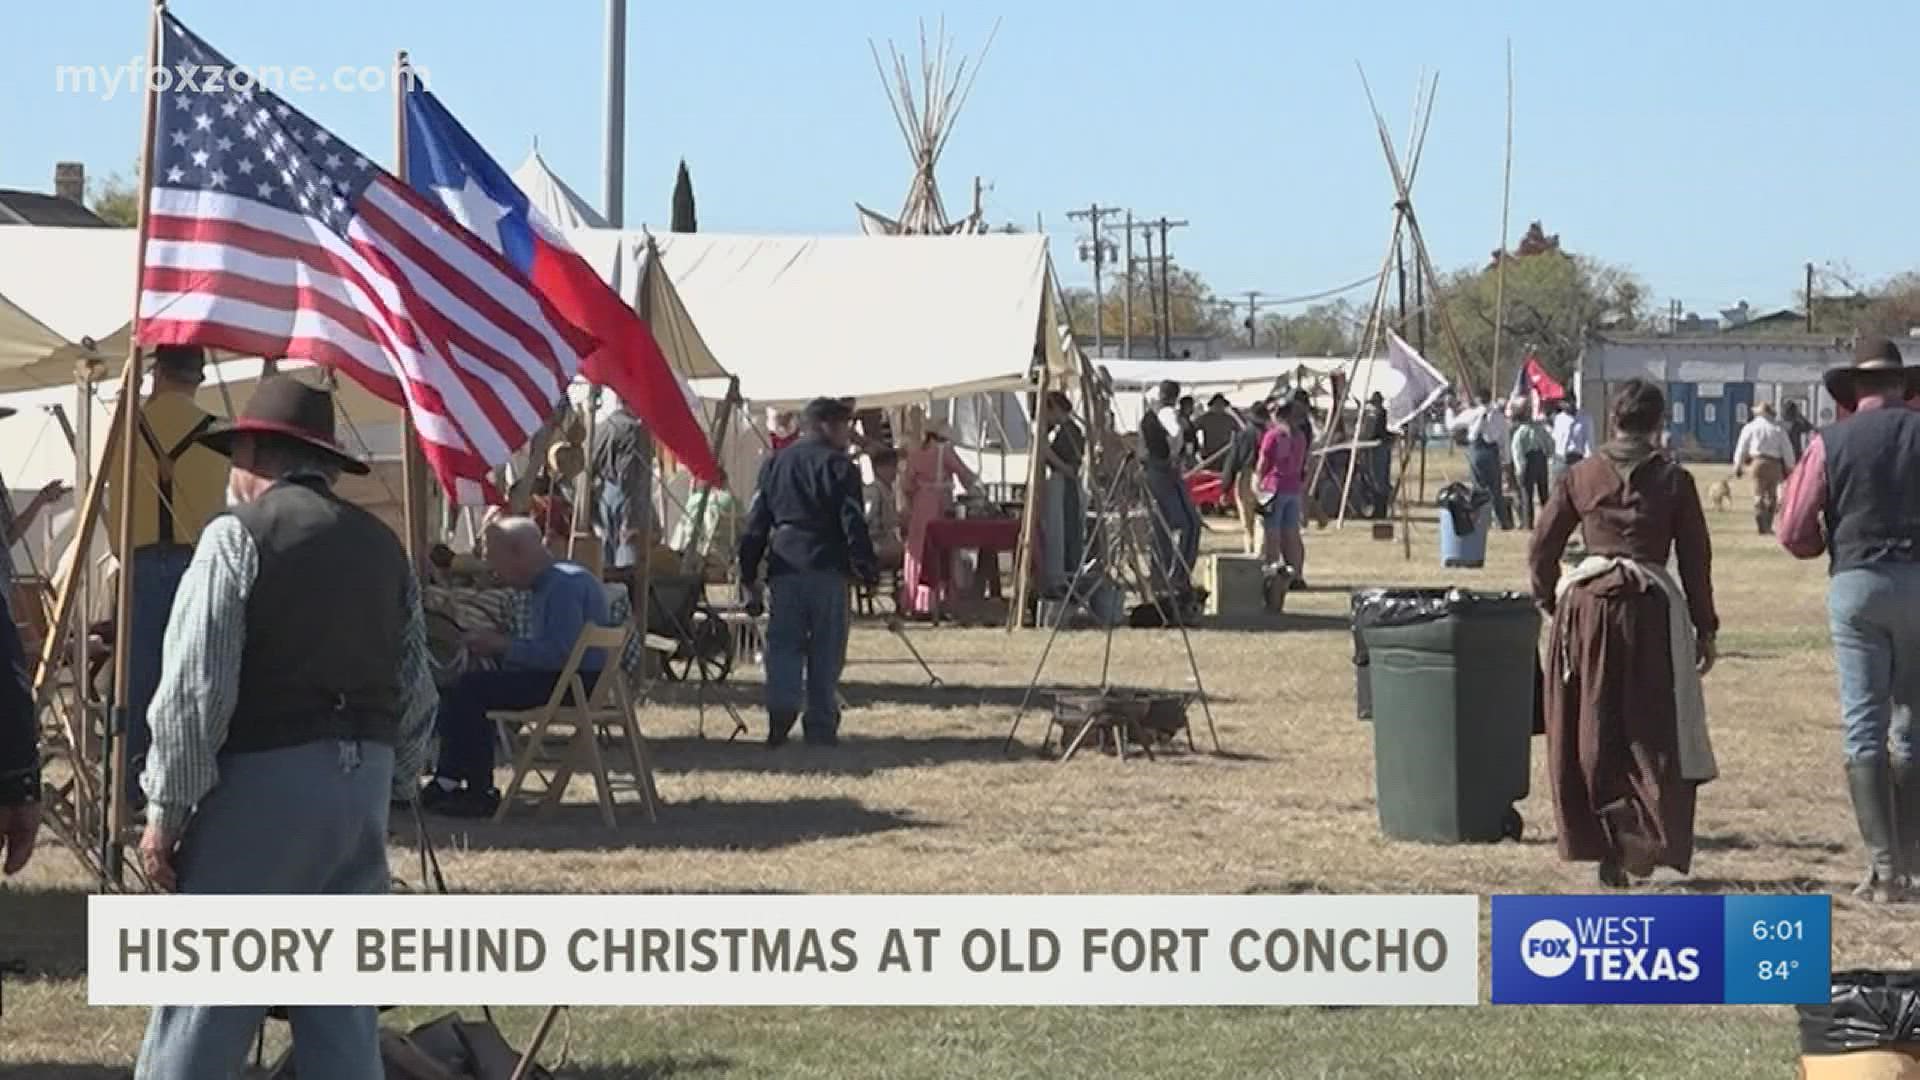 Re-enactors and period traders bring the 1800s to life with this Old Fort Concho event. It only happens once a year.